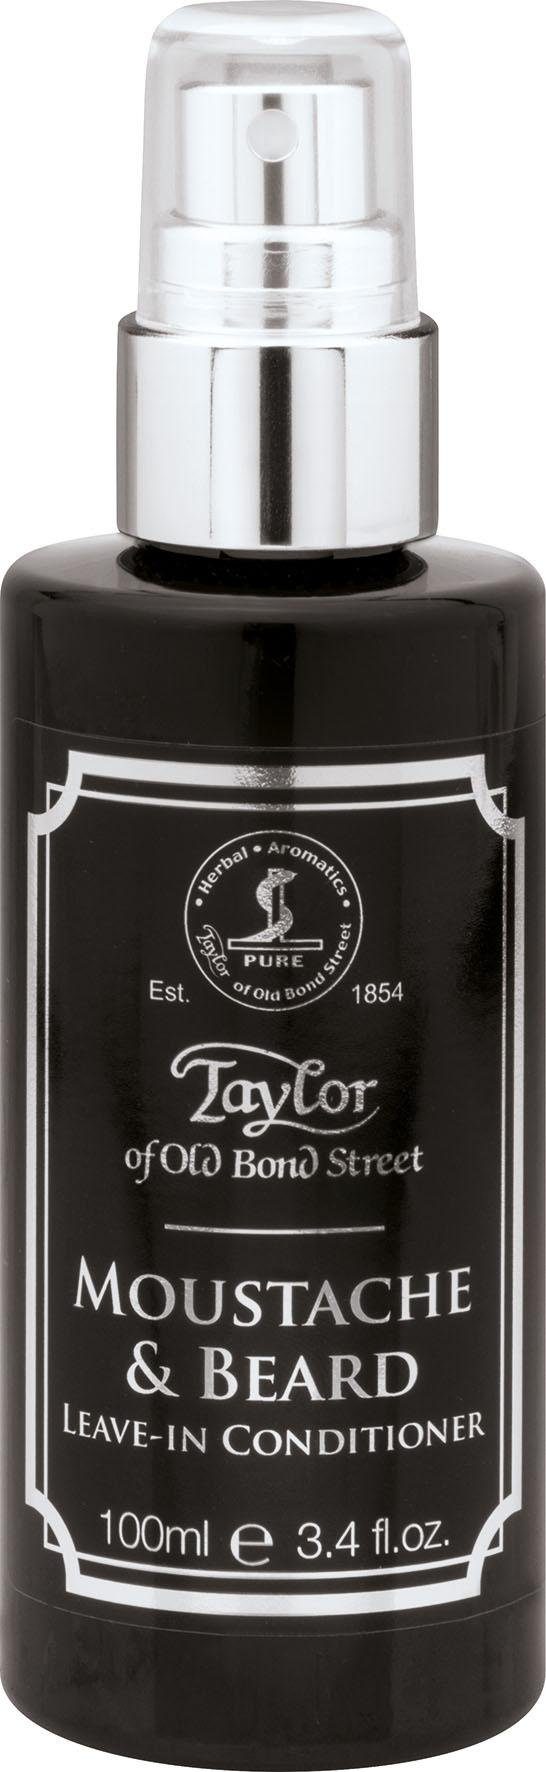 Taylor of Old Moustache Beard Bond Street Conditioner Bartconditioner & Leave-In